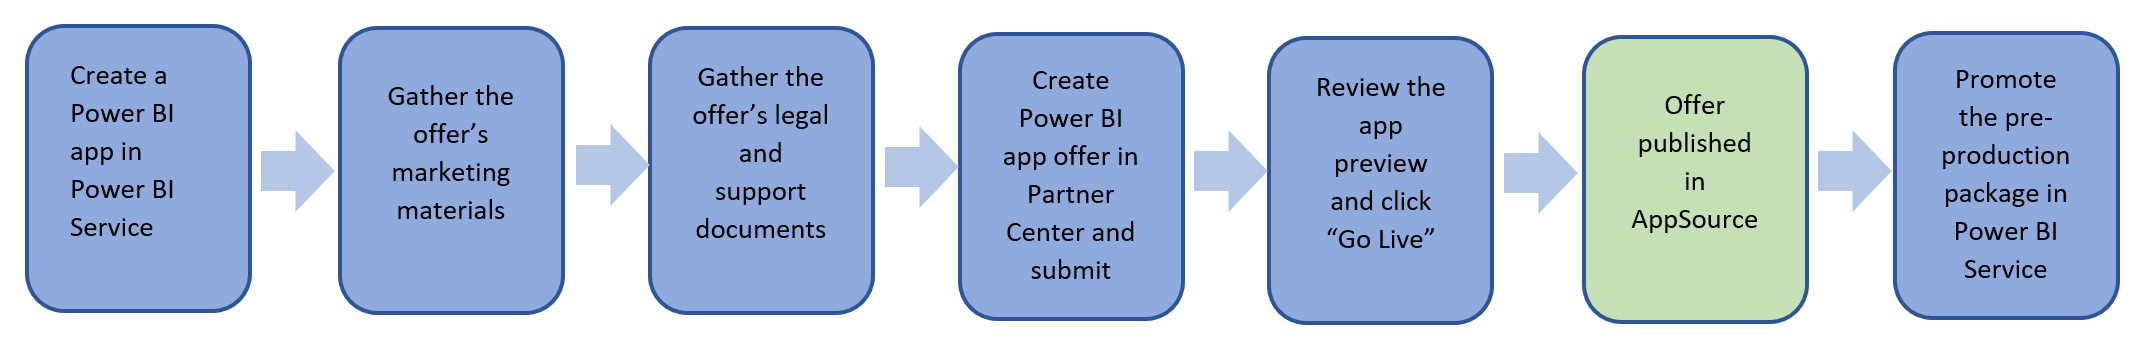 Overview of the steps to publish a Power BI app offer.